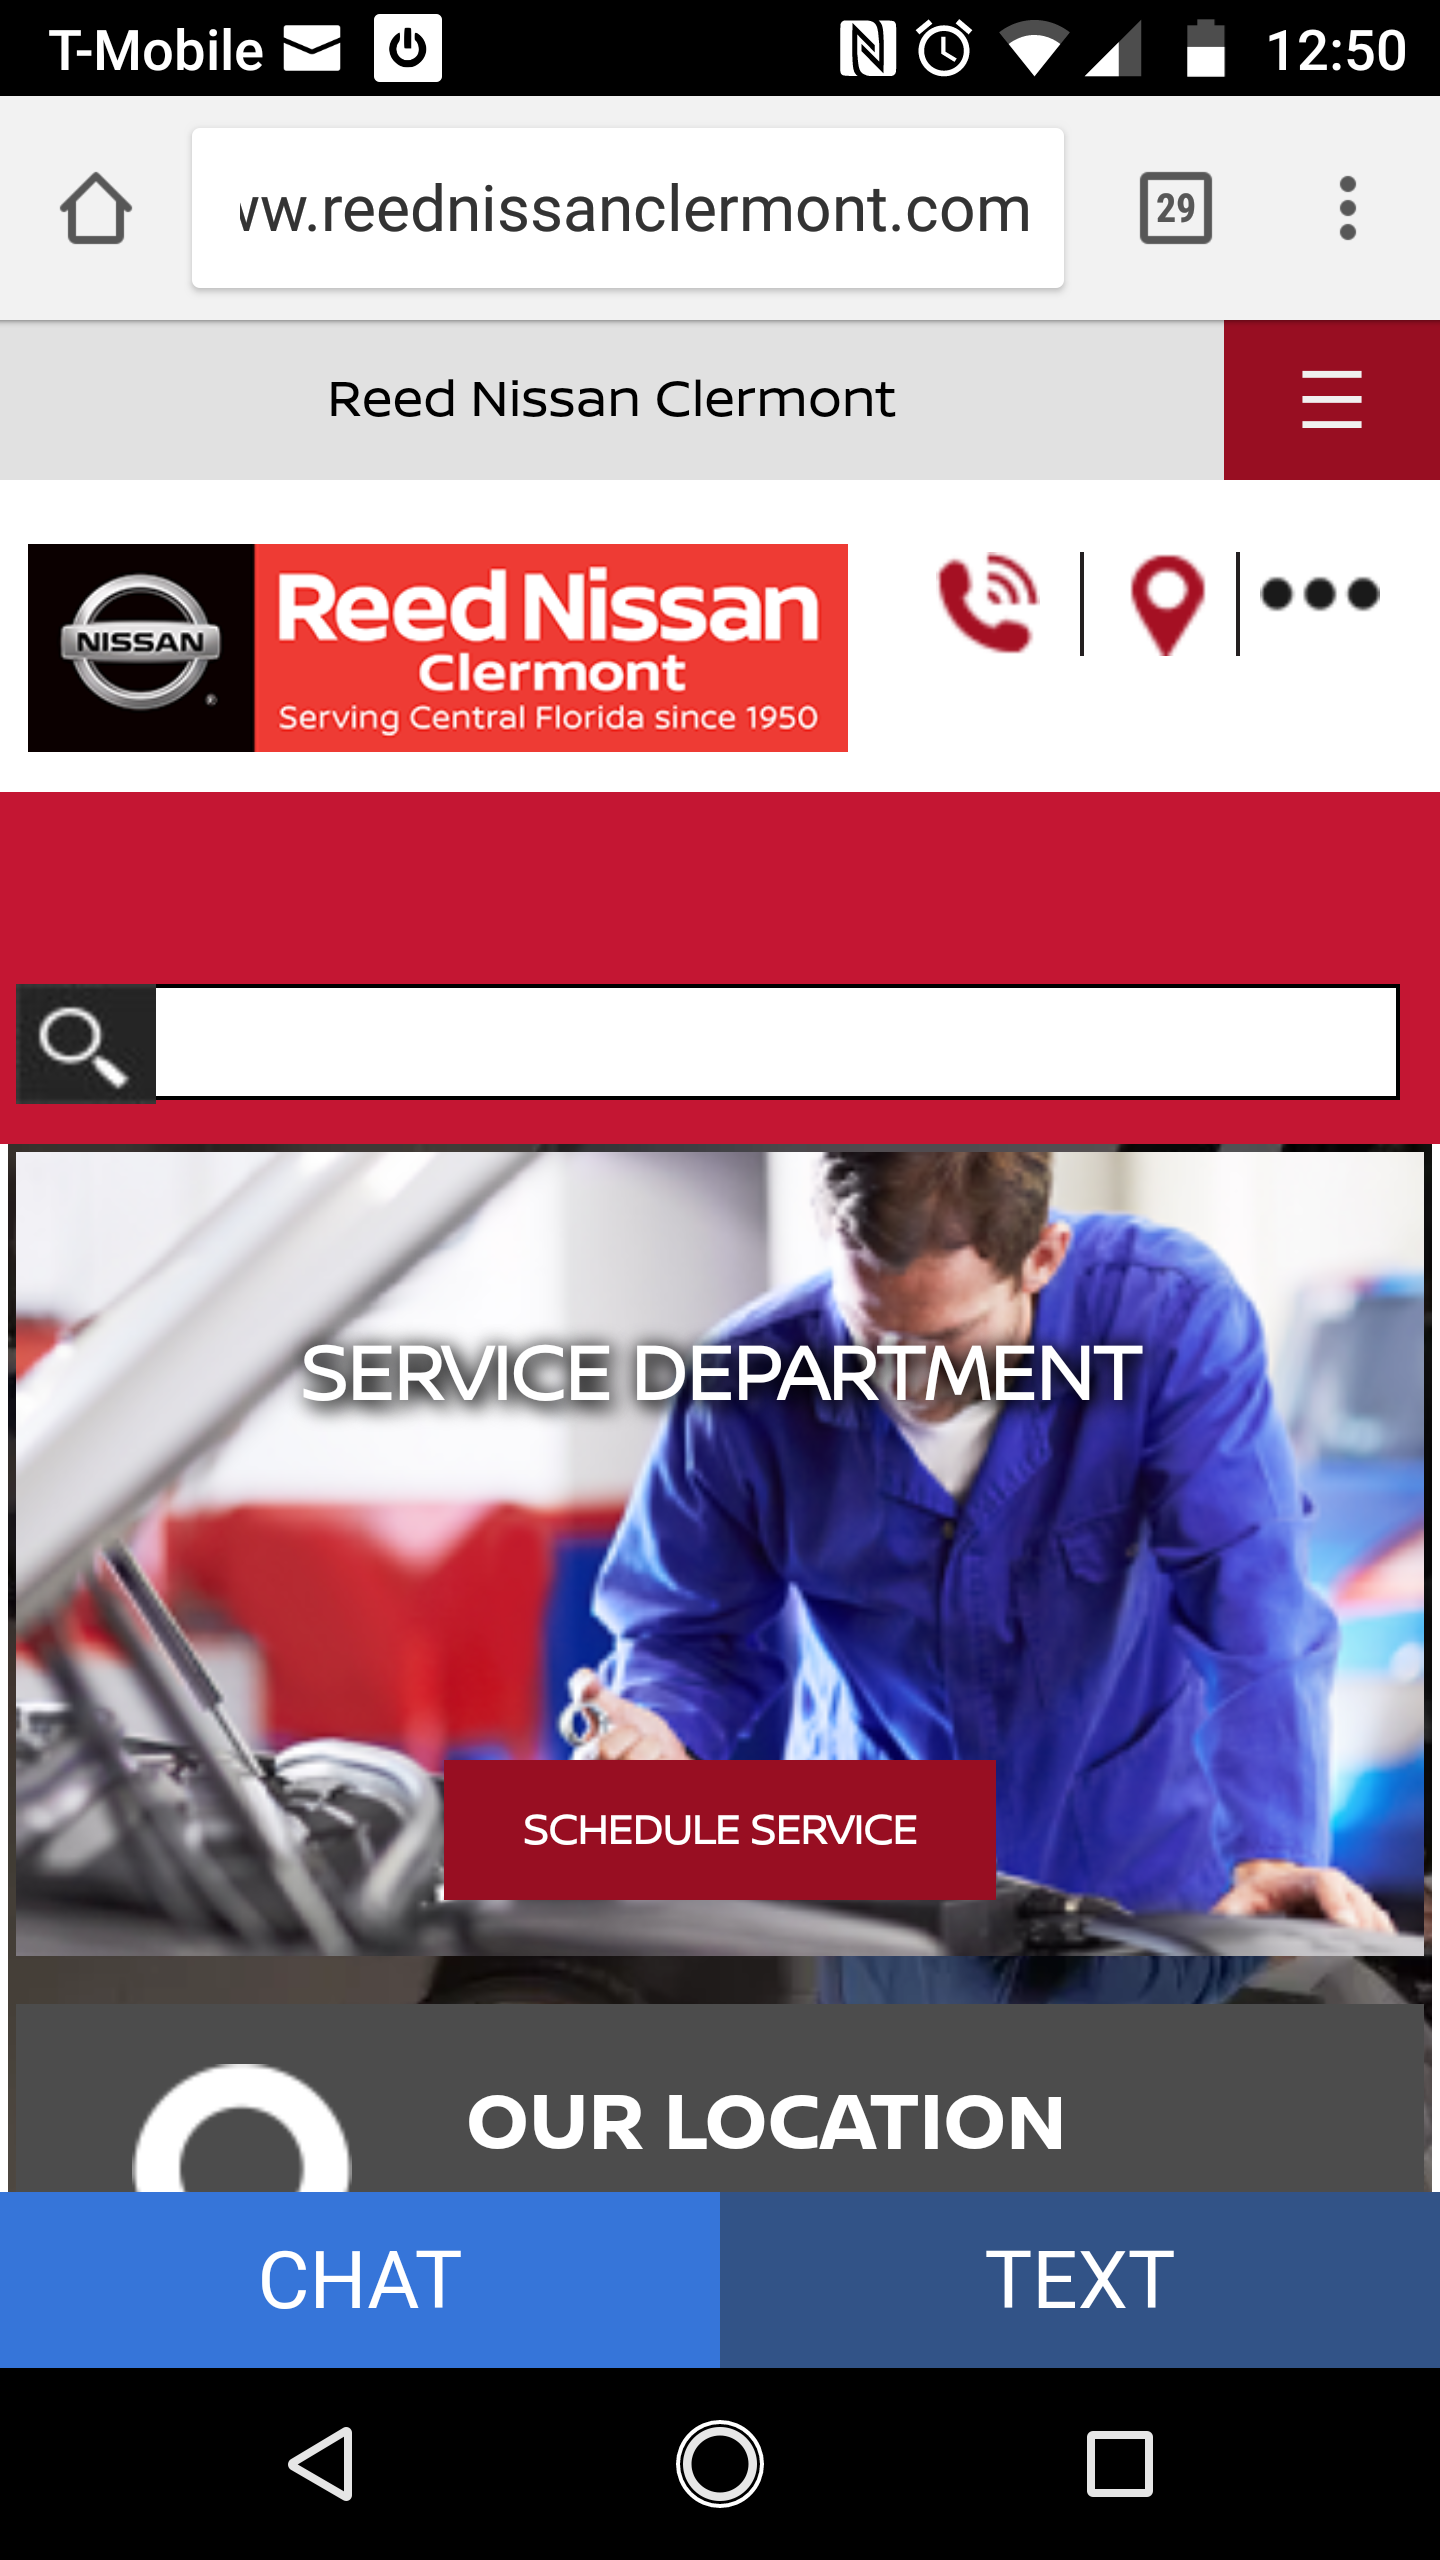 Reed Nissan clermont